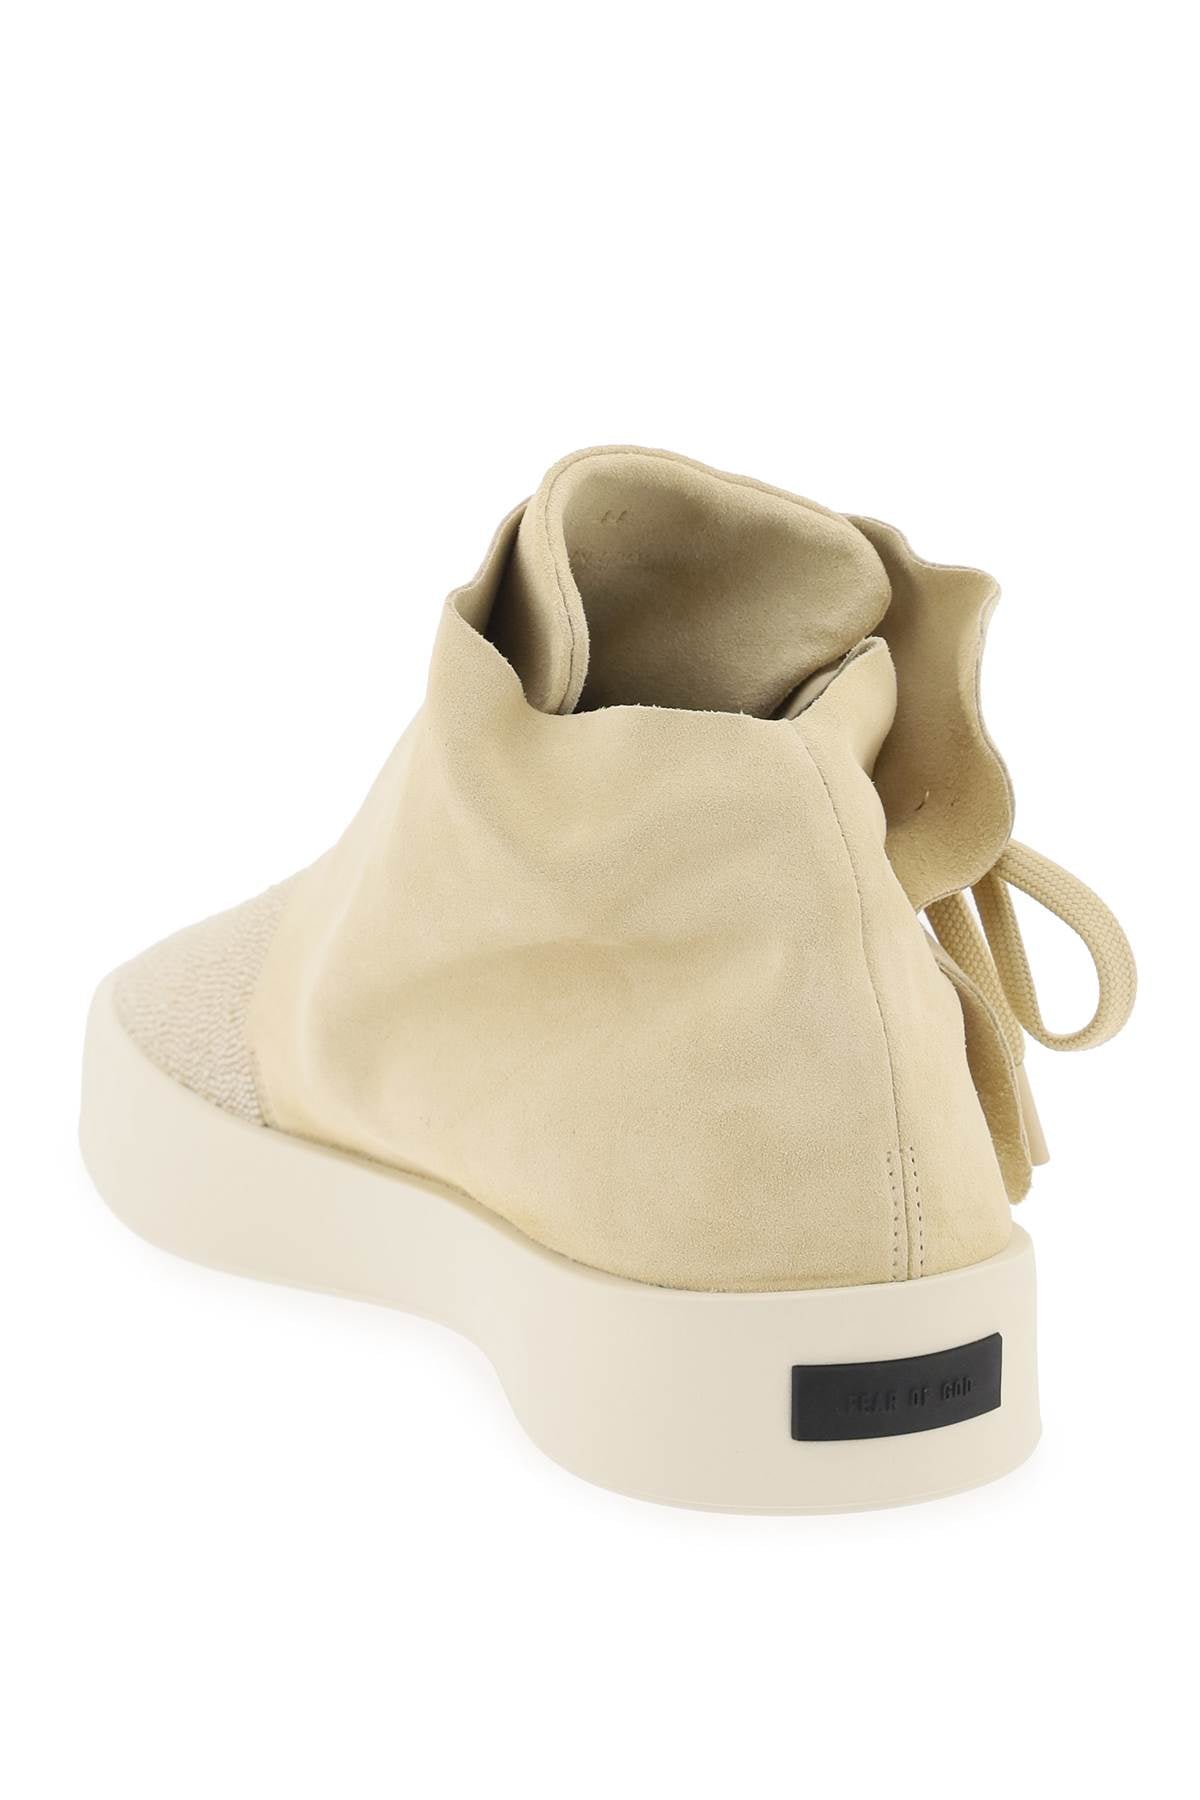 Fear of god mid-top suede and bead sneakers.-2